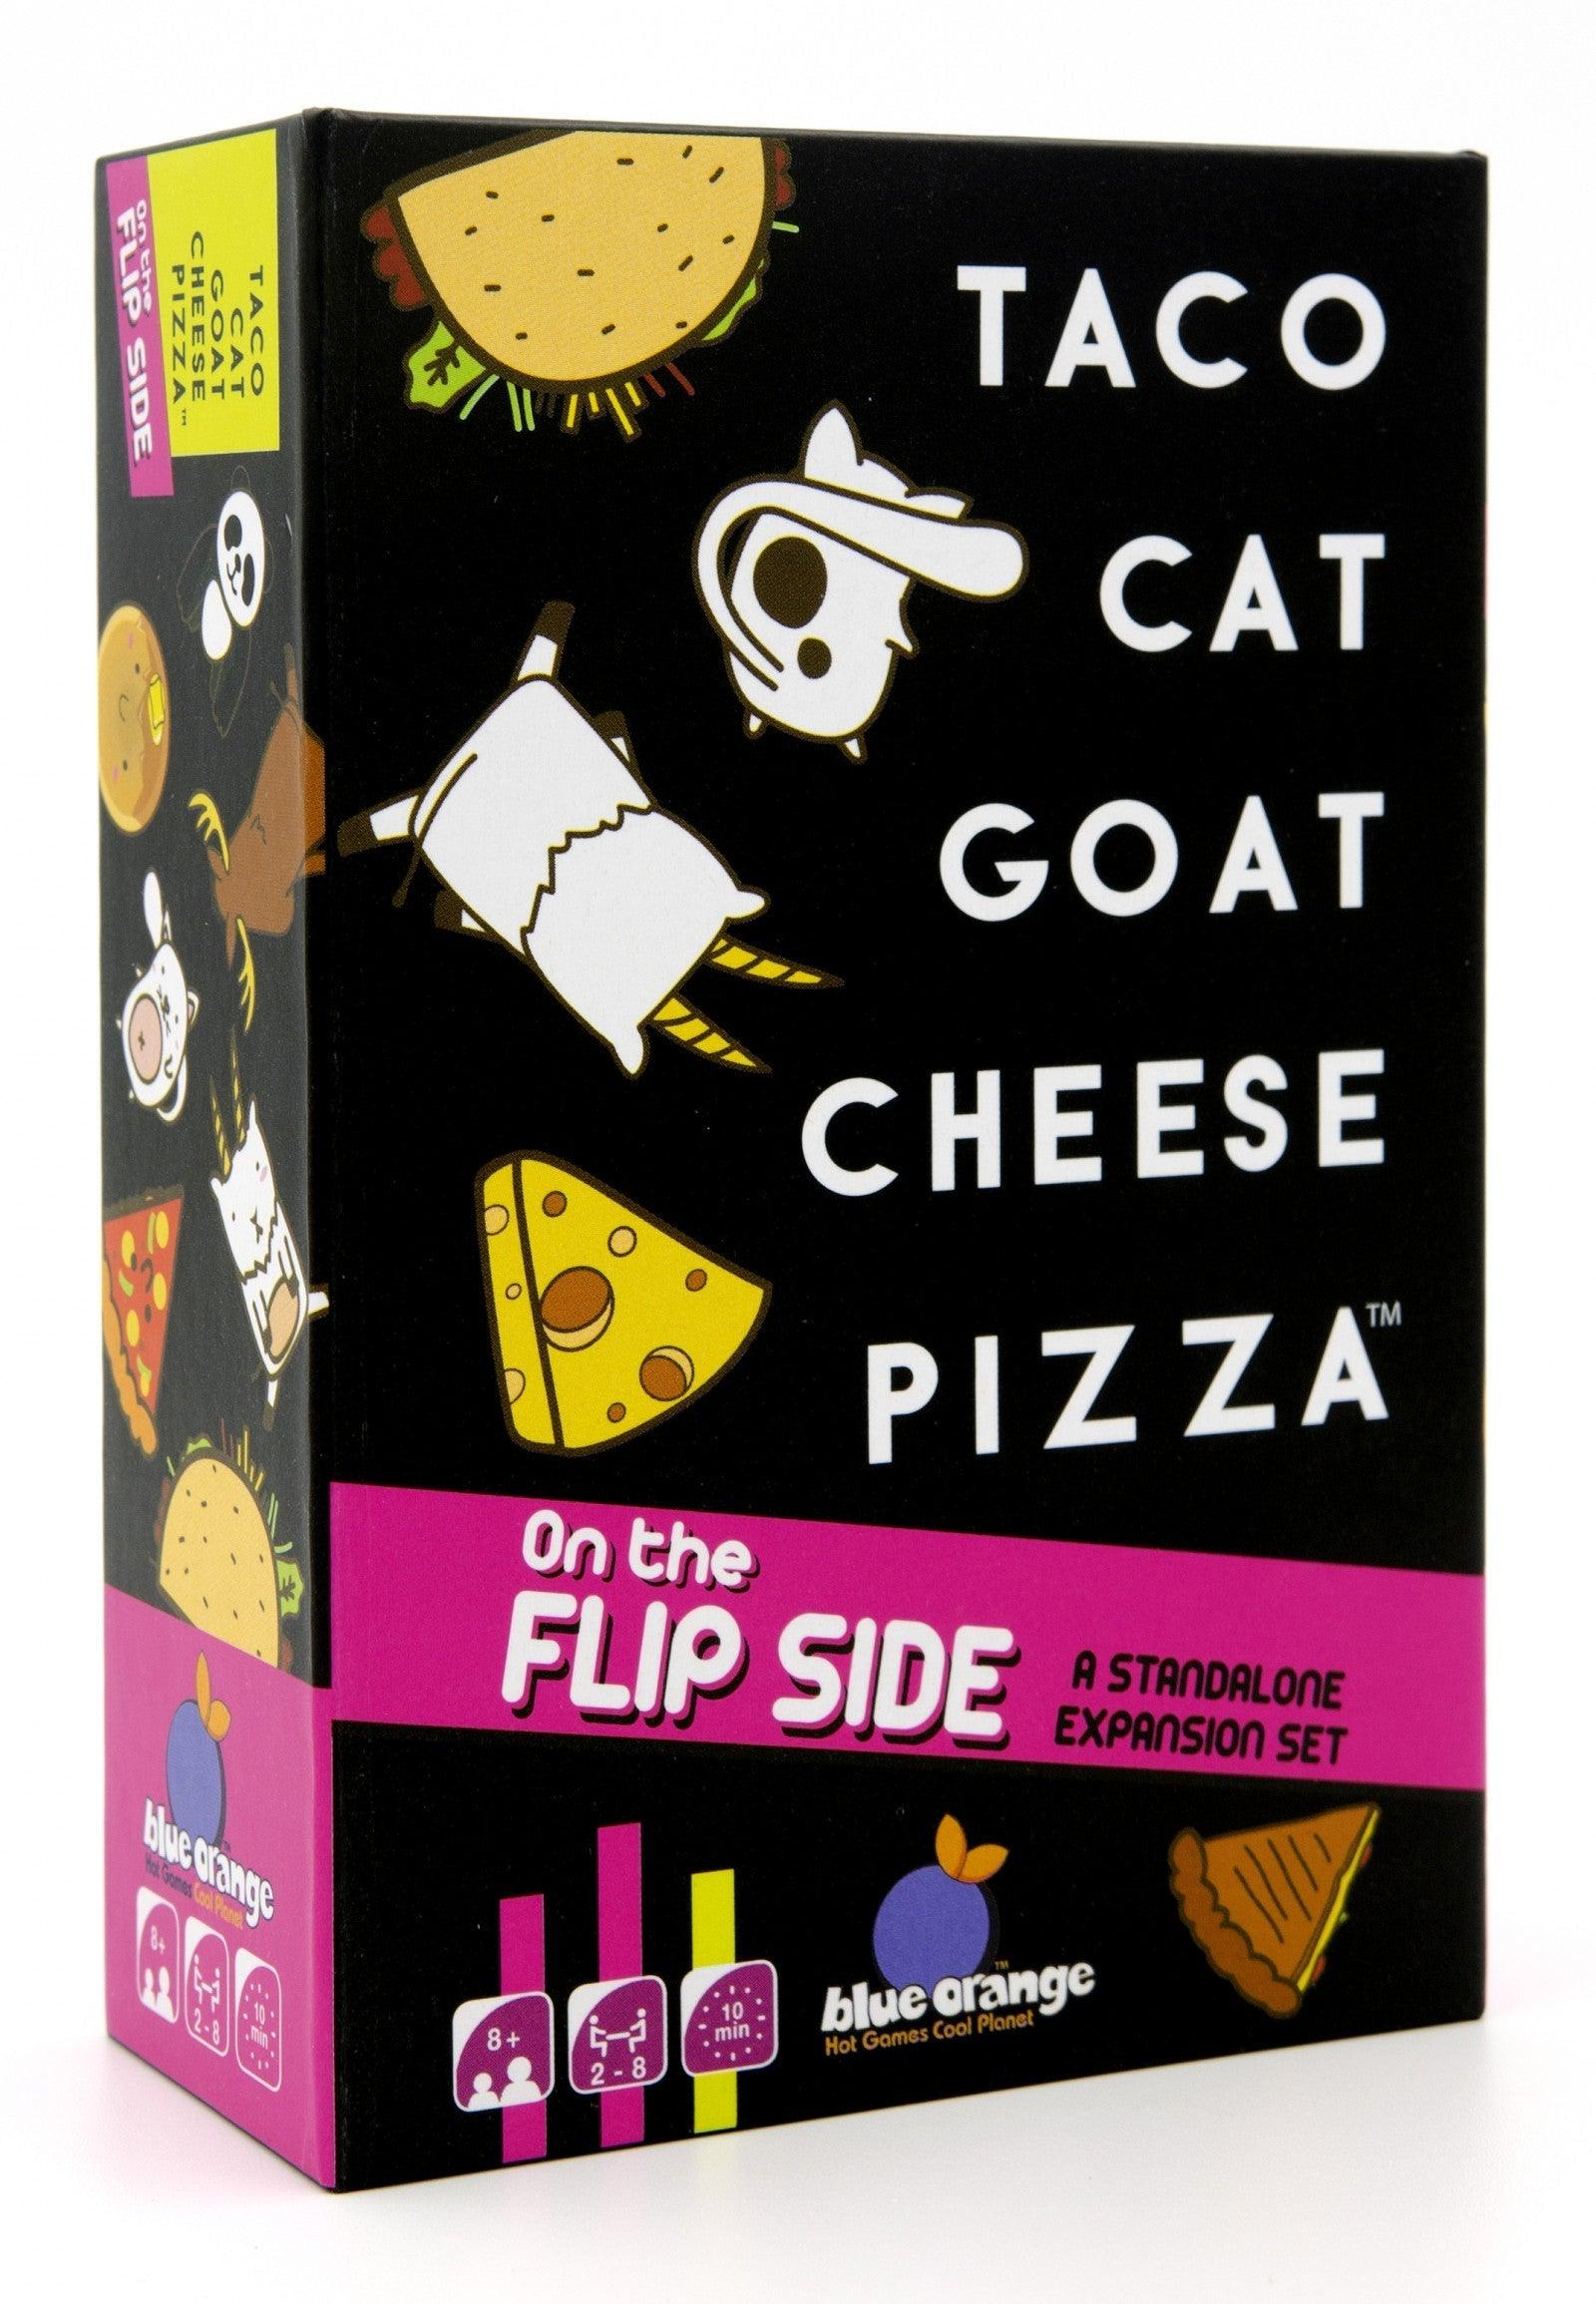 VR-94006 Taco Cat Goat Cheese Pizza on the Flip Side (Stand Alone Expansion) - Blue Orange Games - Titan Pop Culture